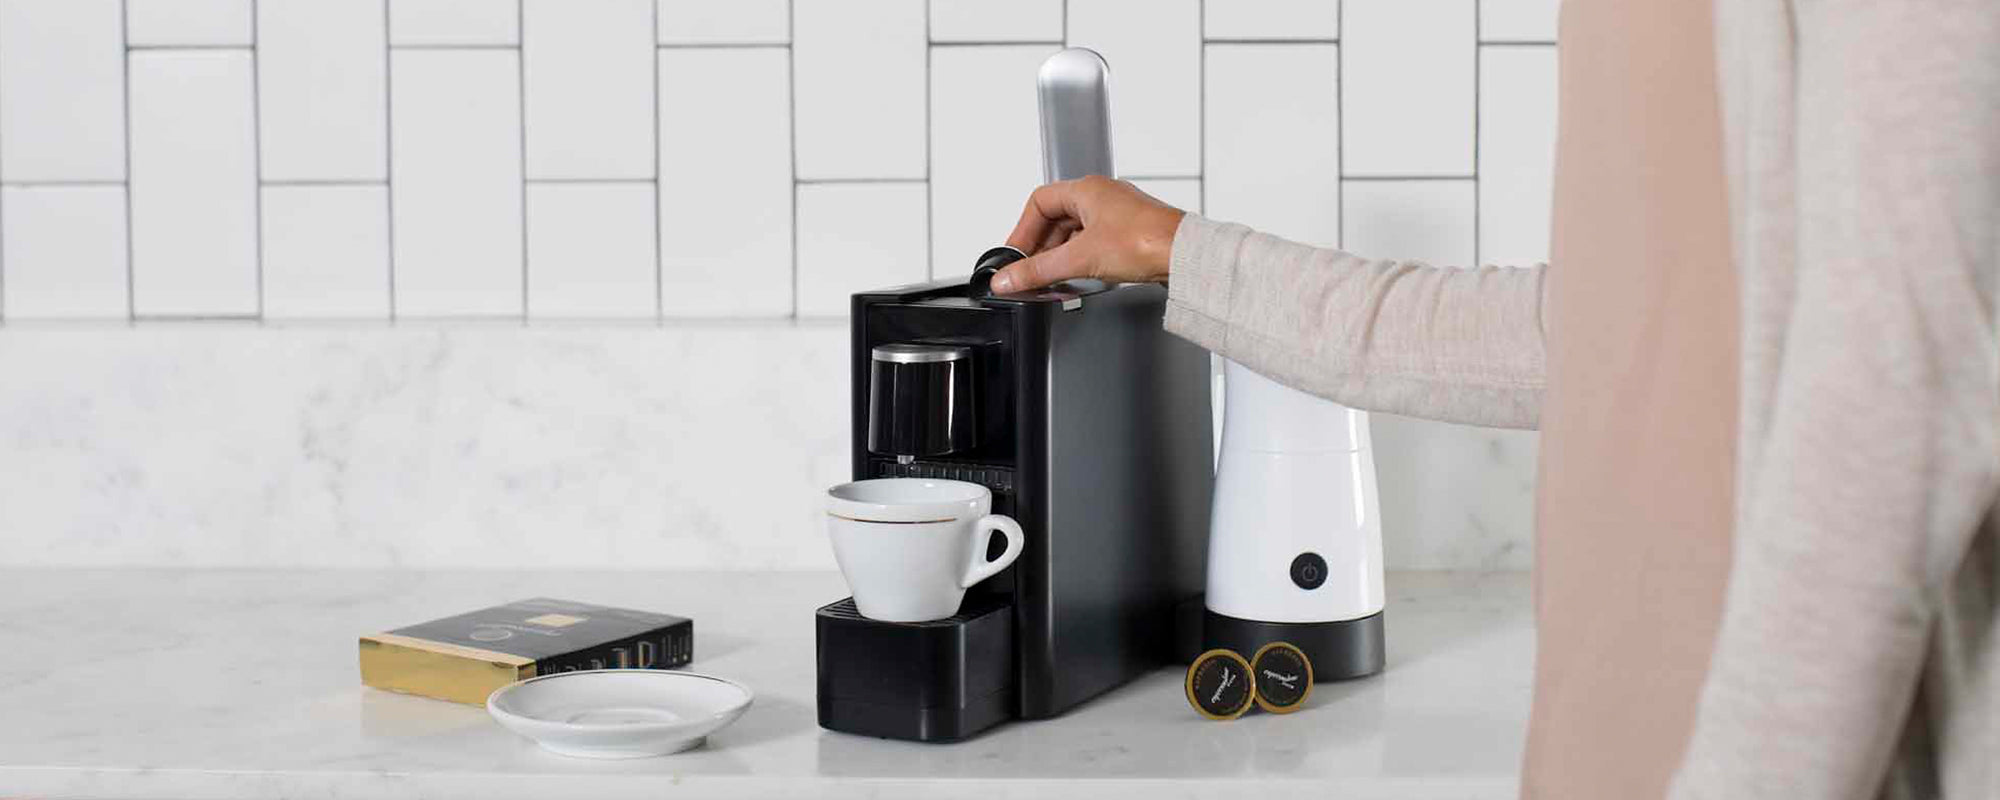 2min Cleaning Mode for Your Coffee Capsule Machine